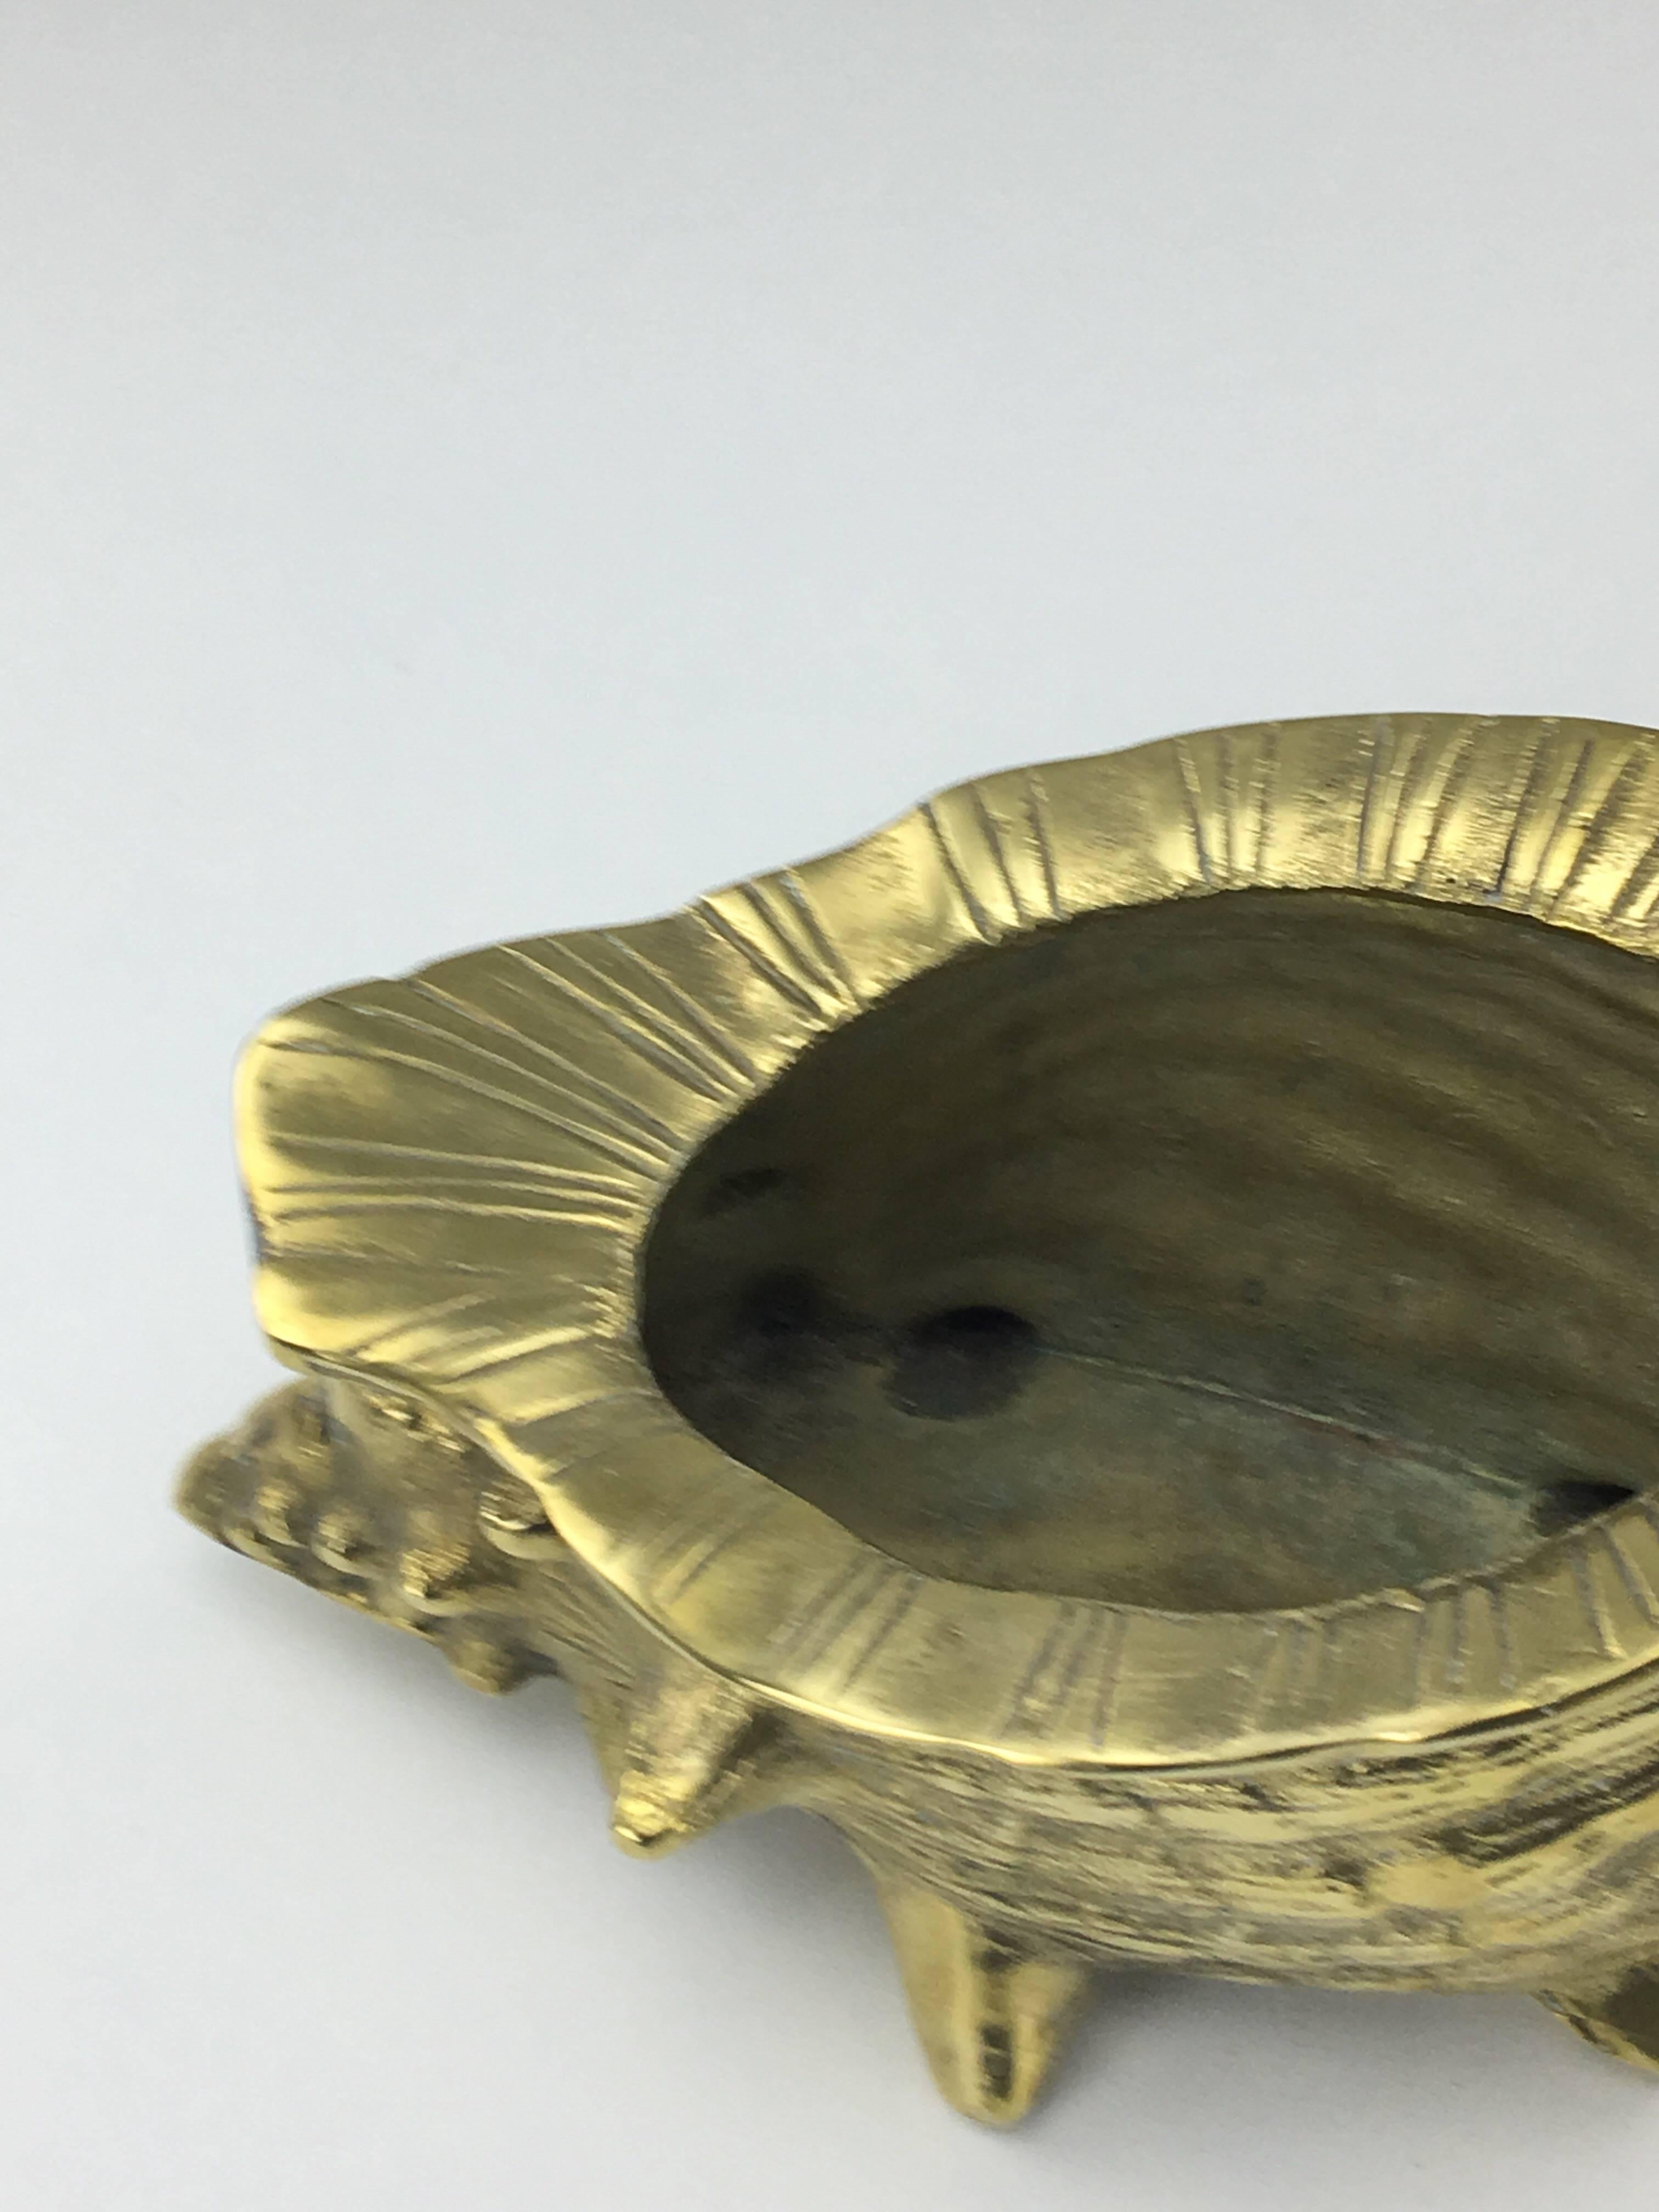 Brass shell centrepiece or vide poche, it can be used as an ashtray too.
In the style Honoré de Paris, Maison Charles.